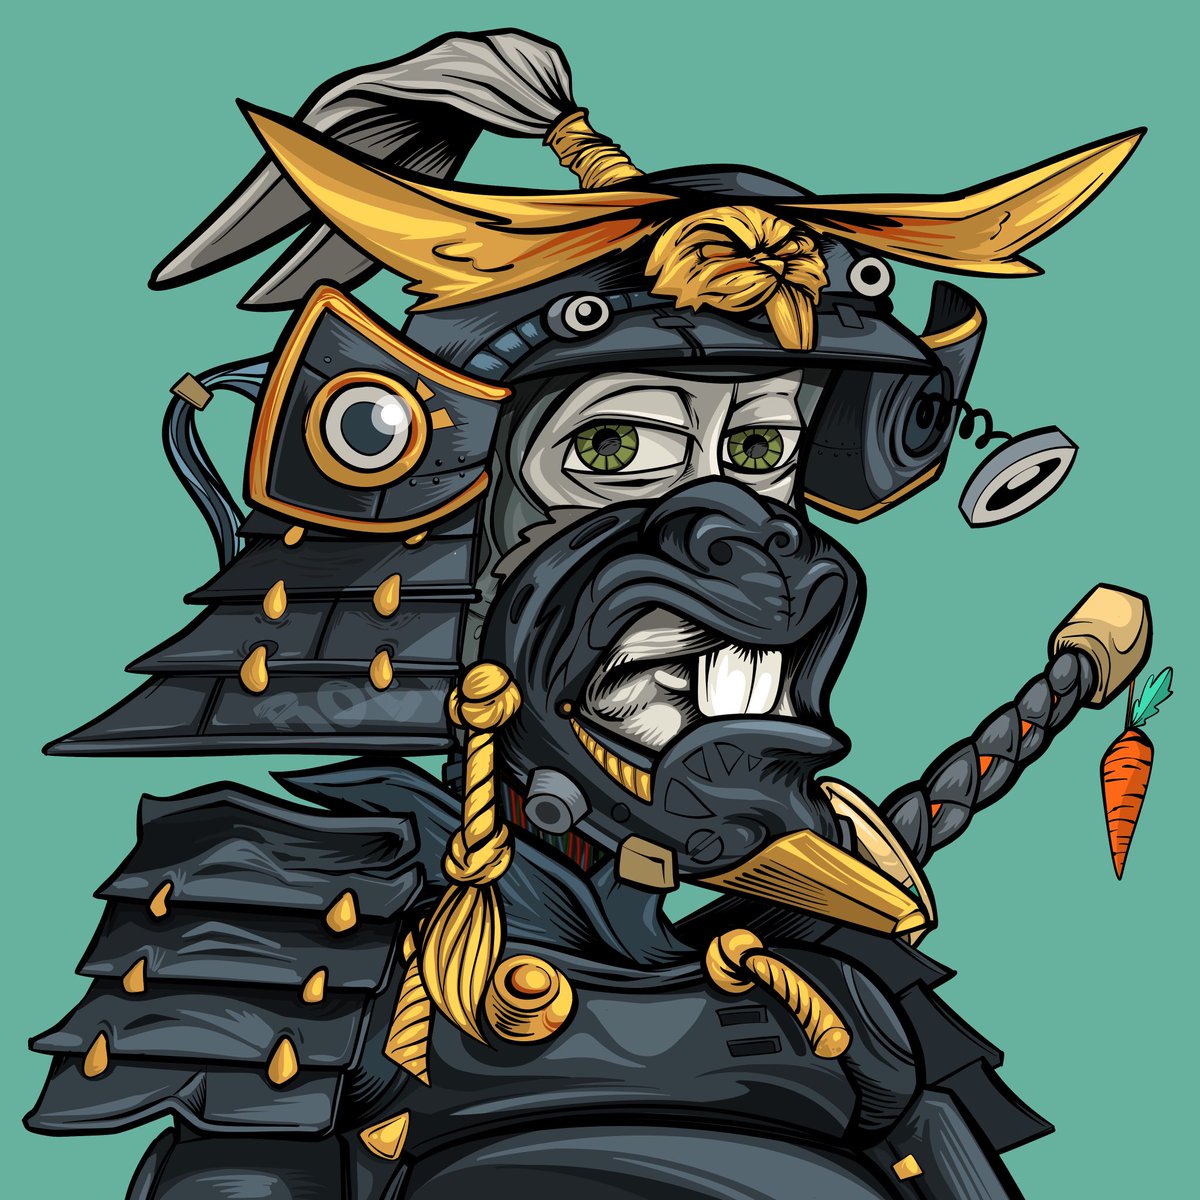 Want the chance to own this awesome origin from @RoboticRabbitS_? Mints from 713 to 738 will be eligible to win it. Don’t wait or I’ll be scooping all the chances! #web3 #NFT #NFTcommunity #ETH #ethereum #blockchain #1of1 #samurai #ronin #animation #IPrights #fantasy #lore